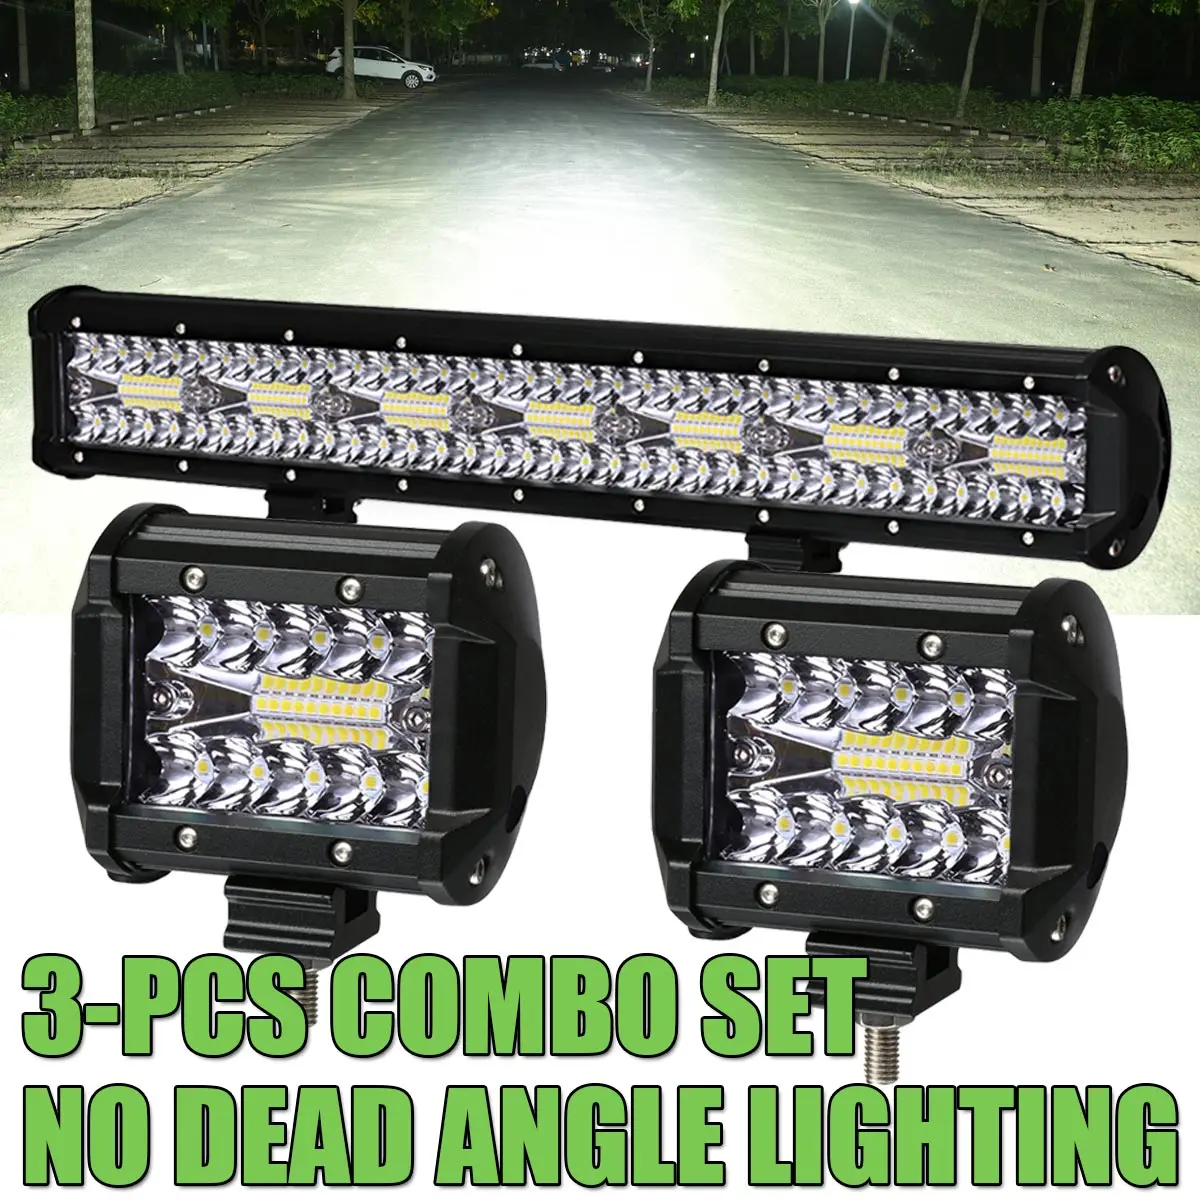 

Combo Set 4 20 Inch 3 Rows LED Bar LED Work Light Bar Combo Beam For Offroad Boat Car Tractor Truck 4x4 SUV ATV Vehicle Driving